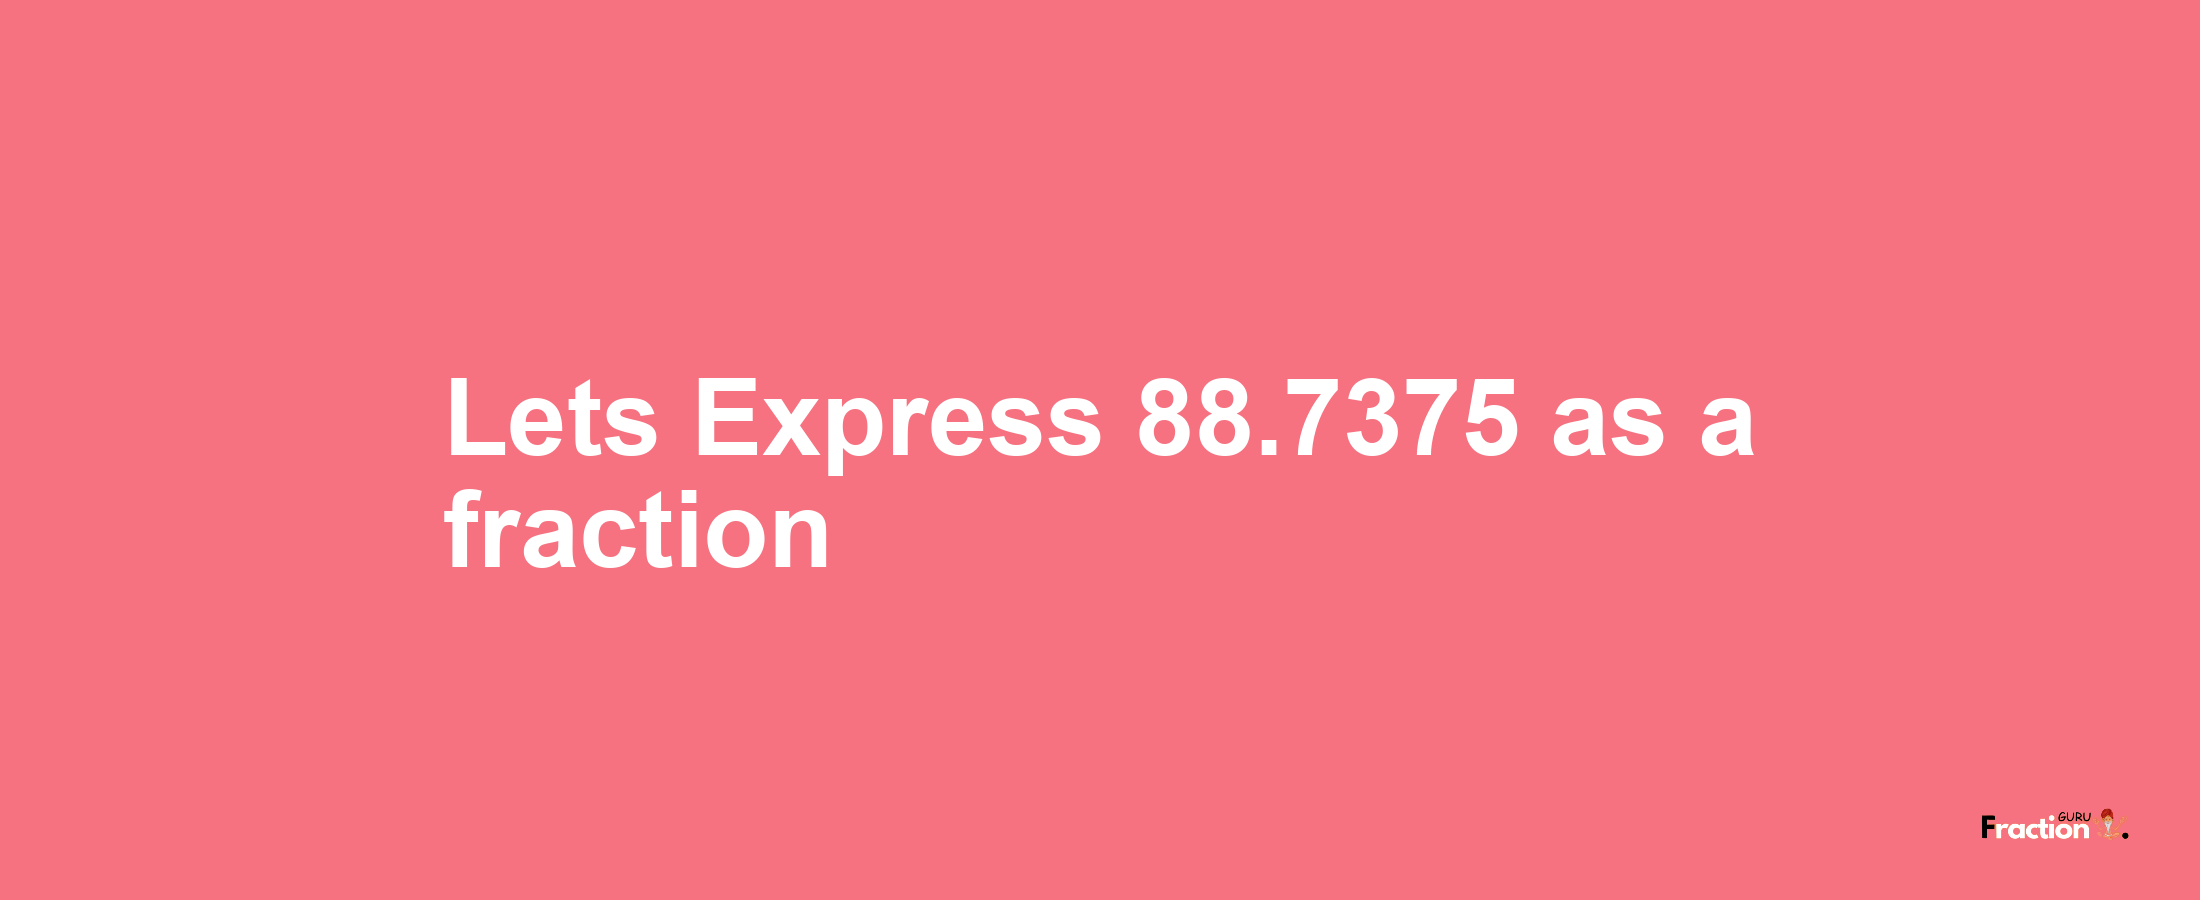 Lets Express 88.7375 as afraction